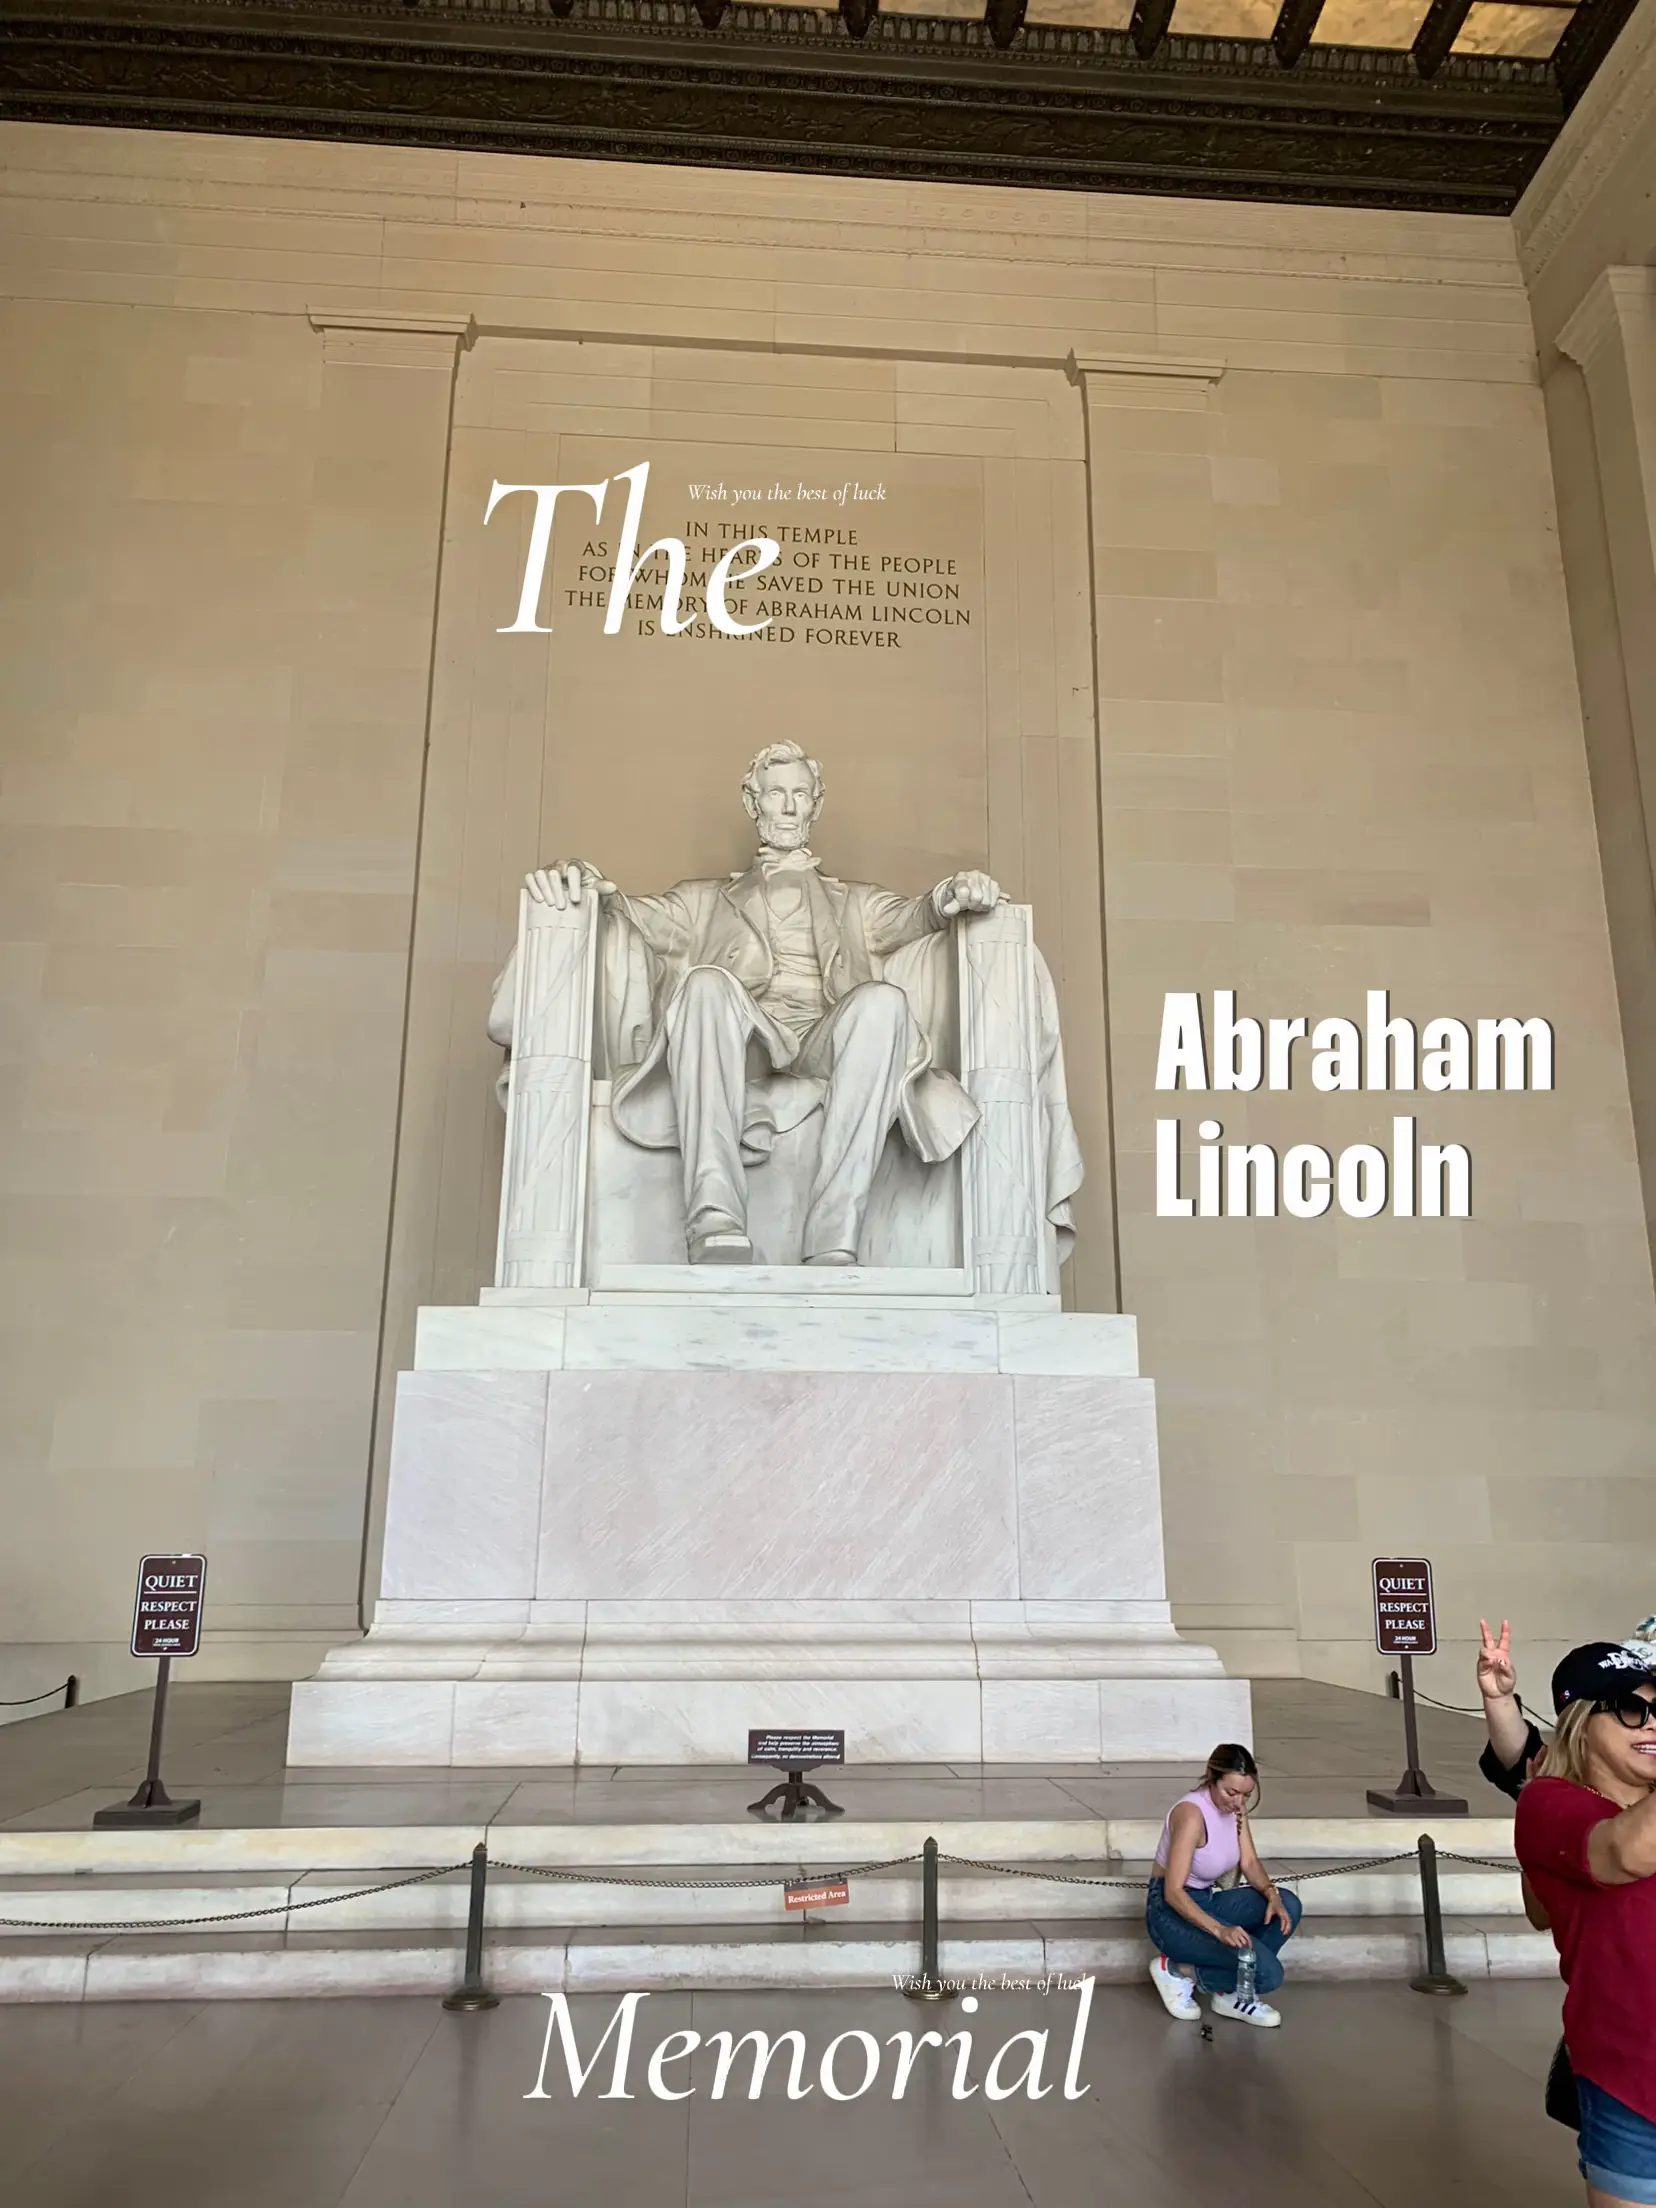  The Abraham Lincoln Memorial is a large stone obelisk with a statue of the president on it.